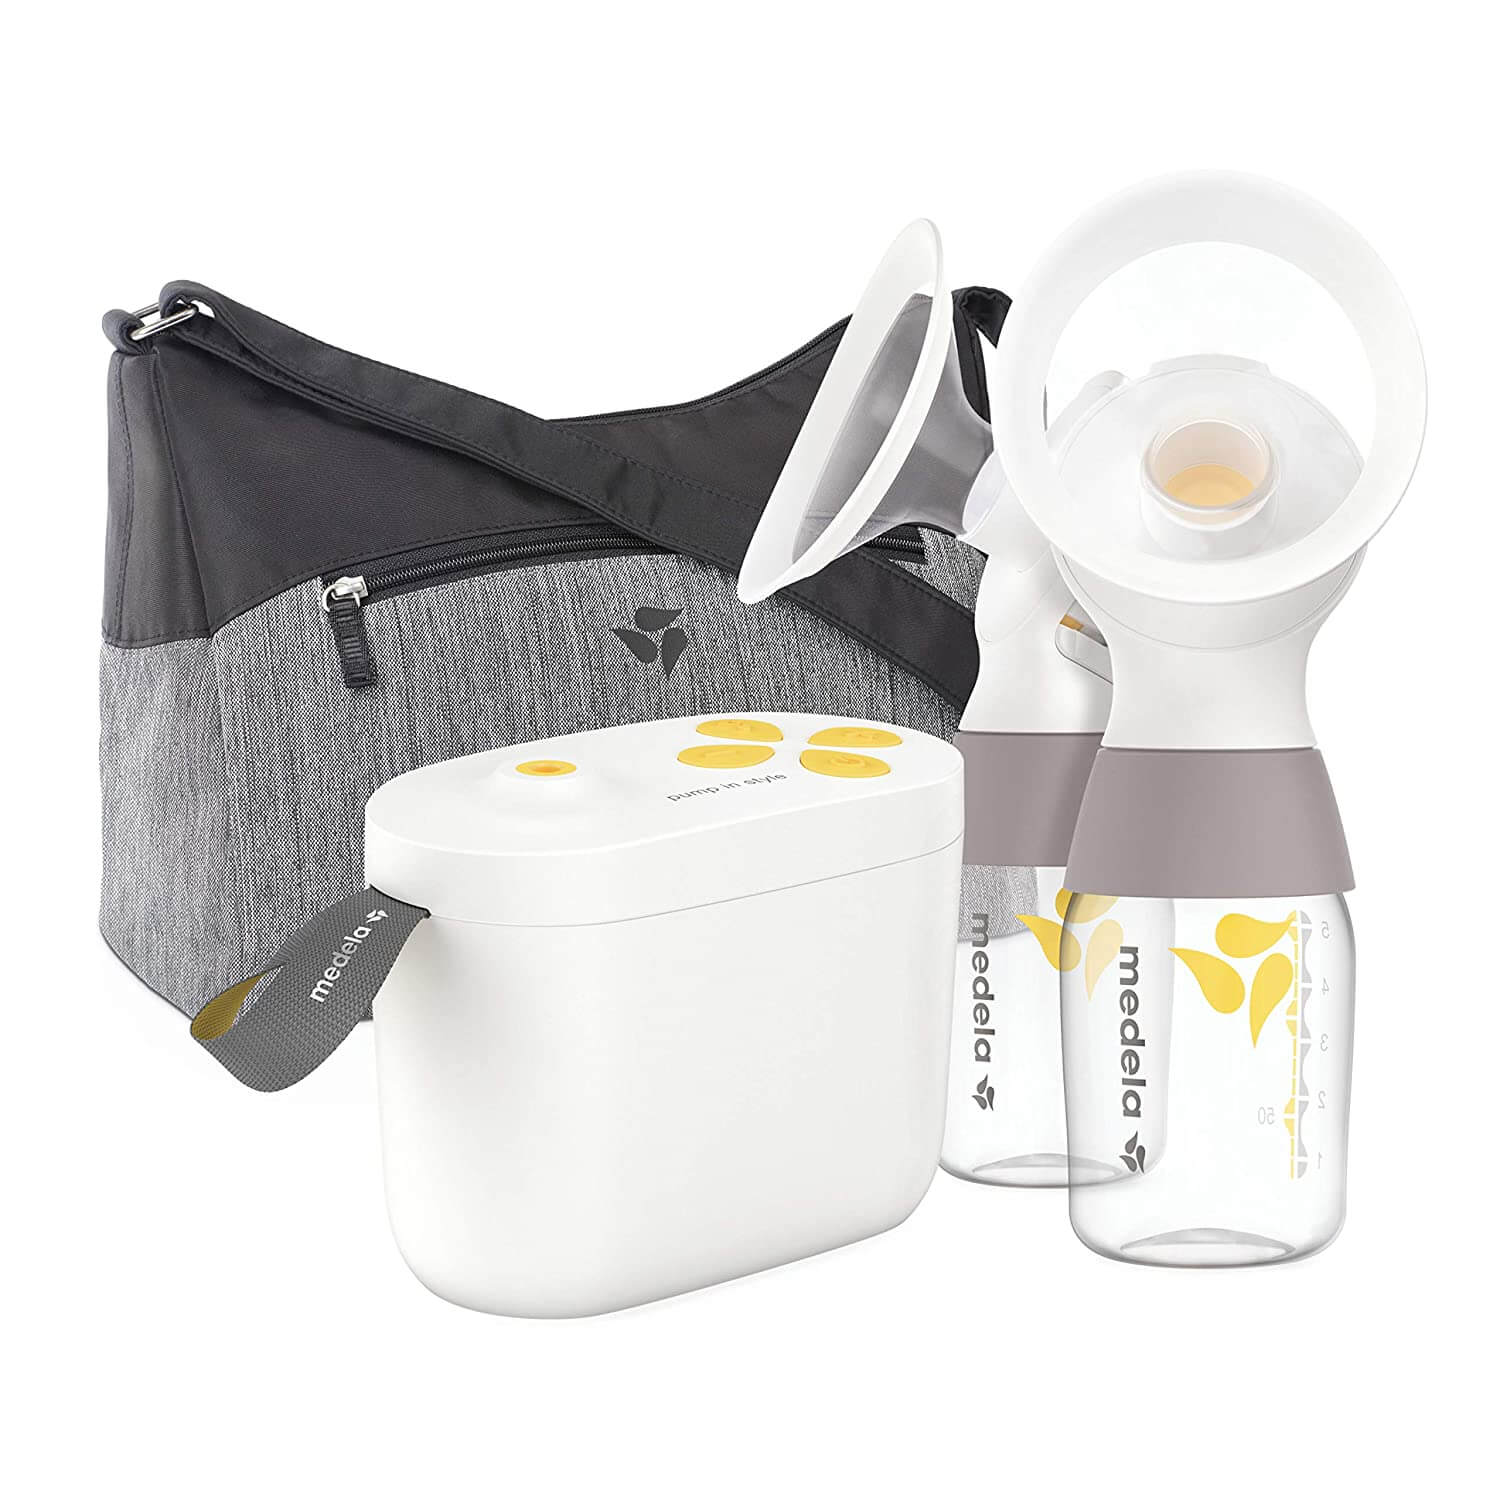 Medela Electric Breast Pump, Pump in Style with MaxFlow